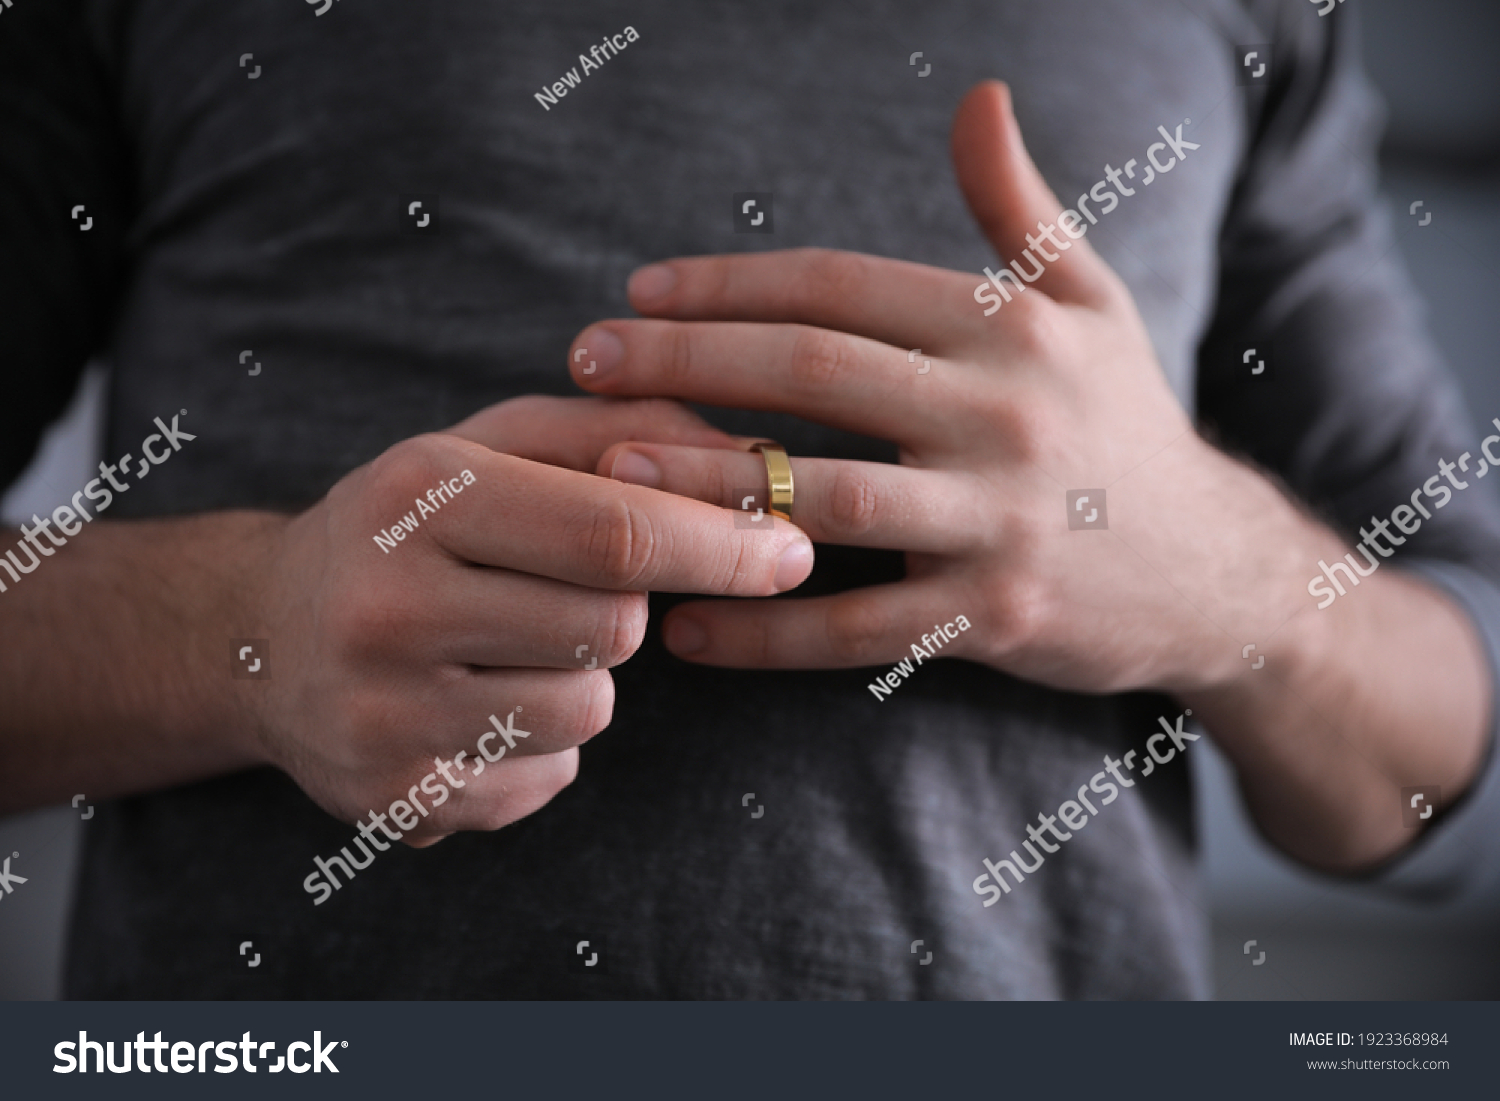 Man taking off wedding ring on blurred background, closeup. Divorce concept #1923368984